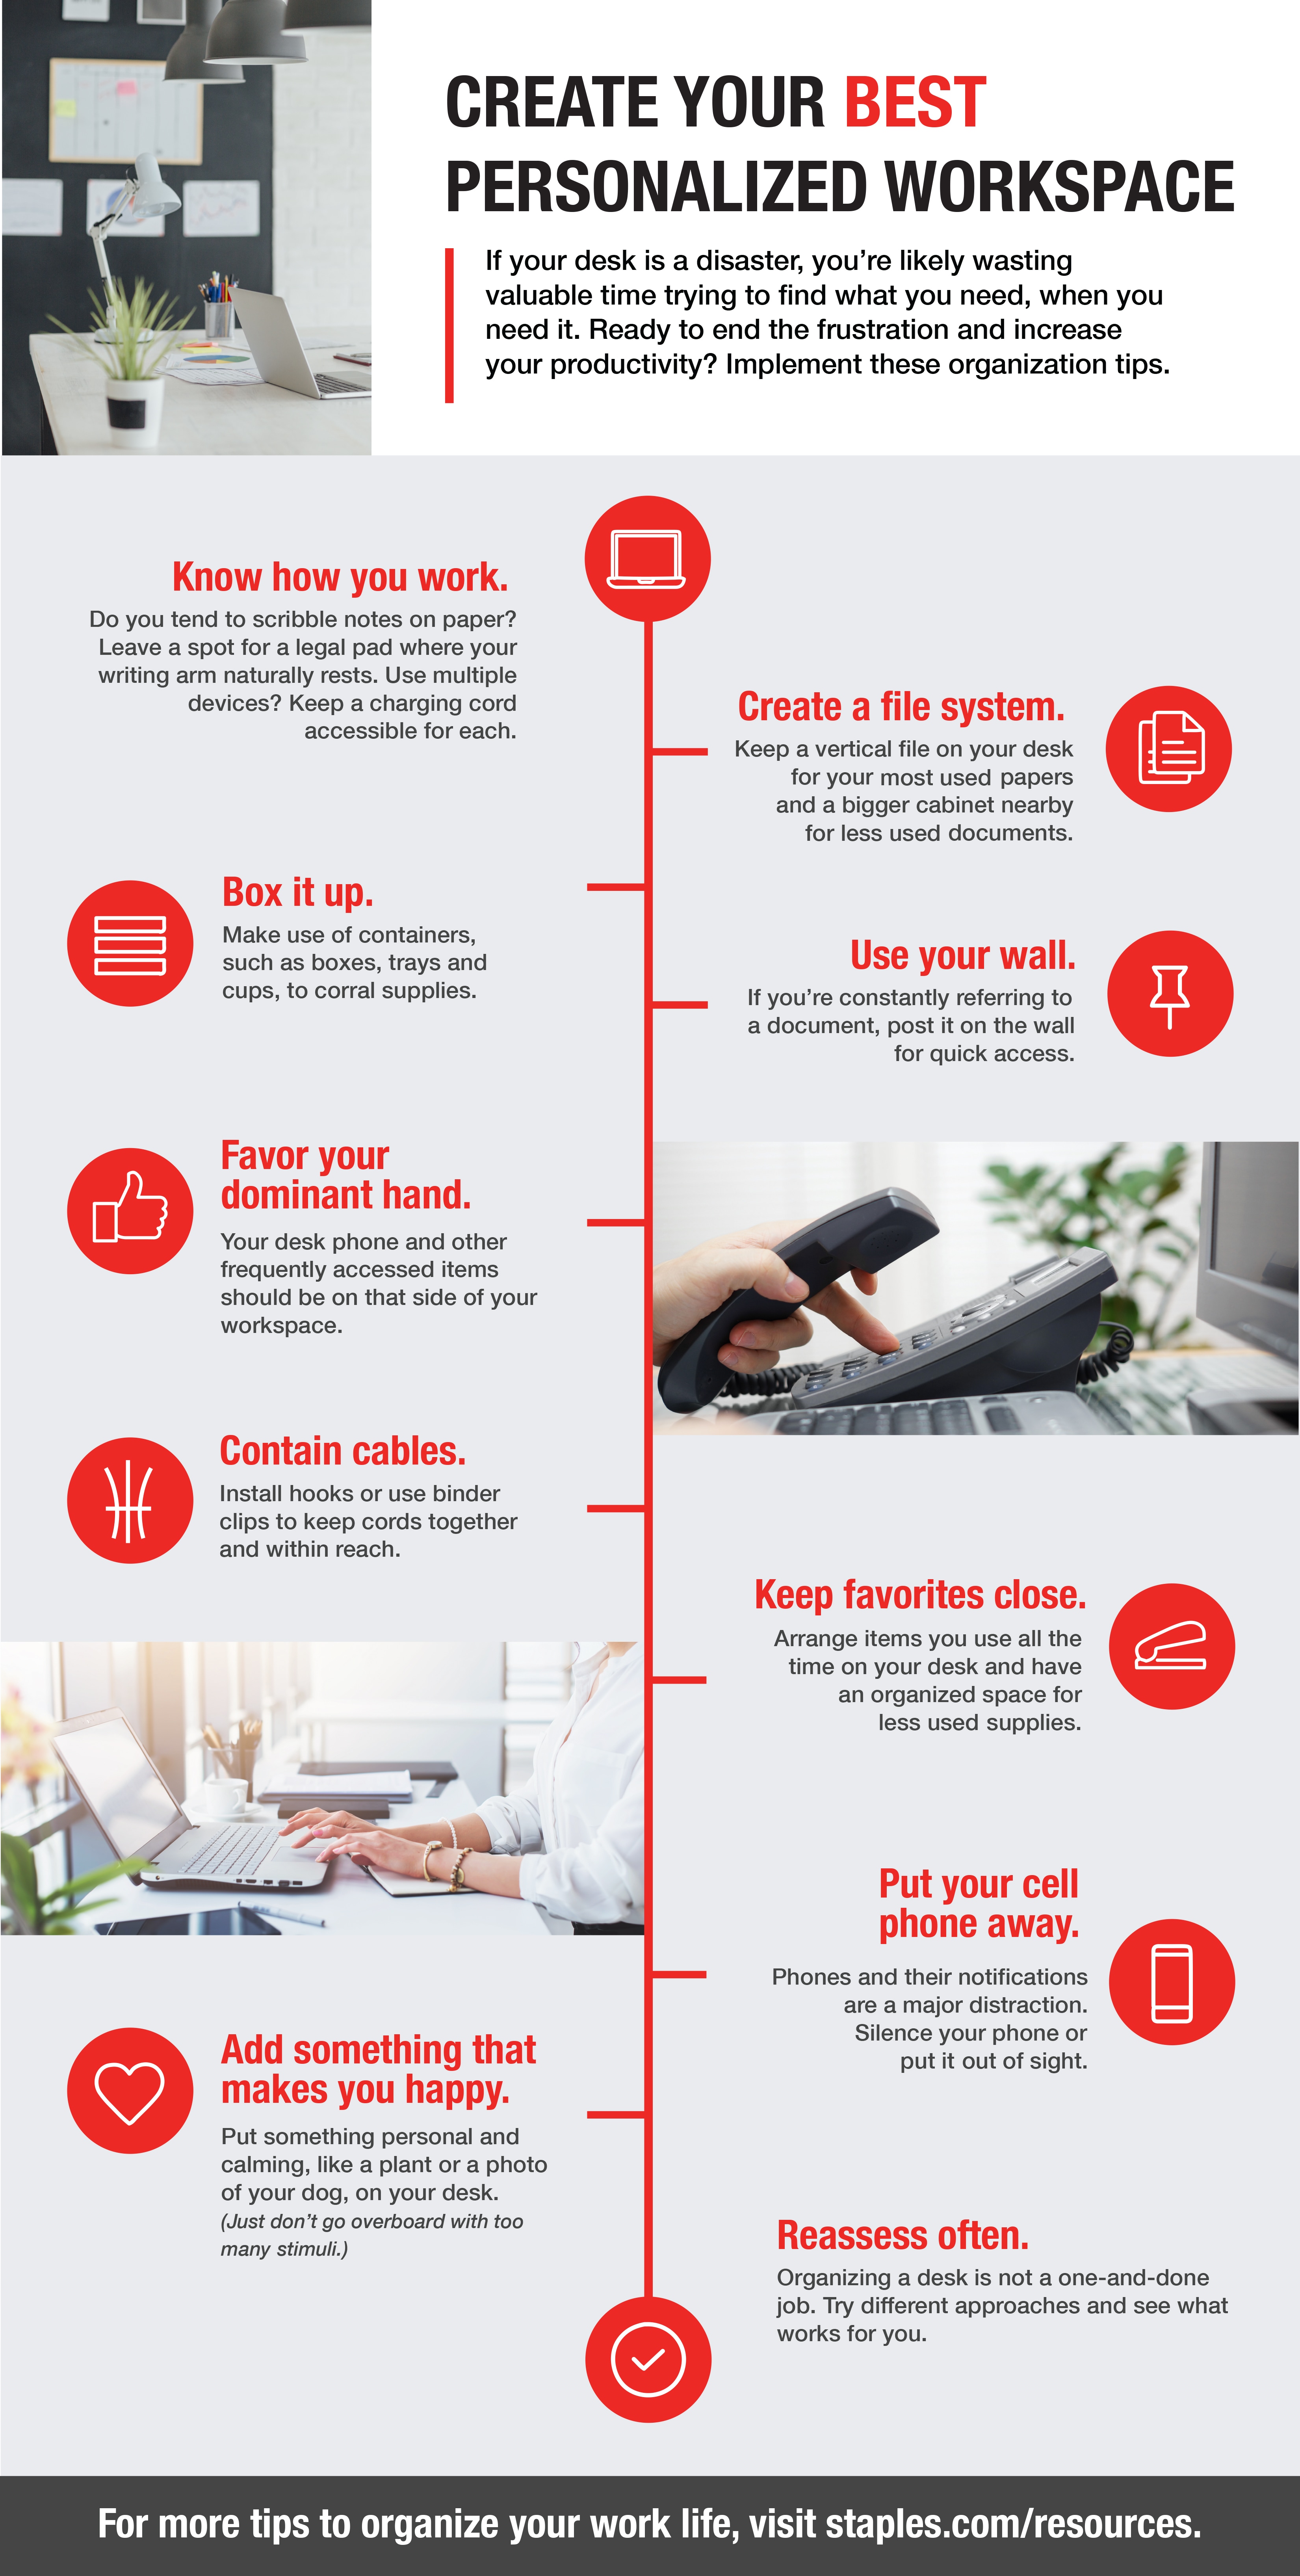 https://marketingassets.staples.com/m/033dc0613091f68d/original/Create-your-Ideal-Workspace-and-Get-Organized-Infographic.jpg